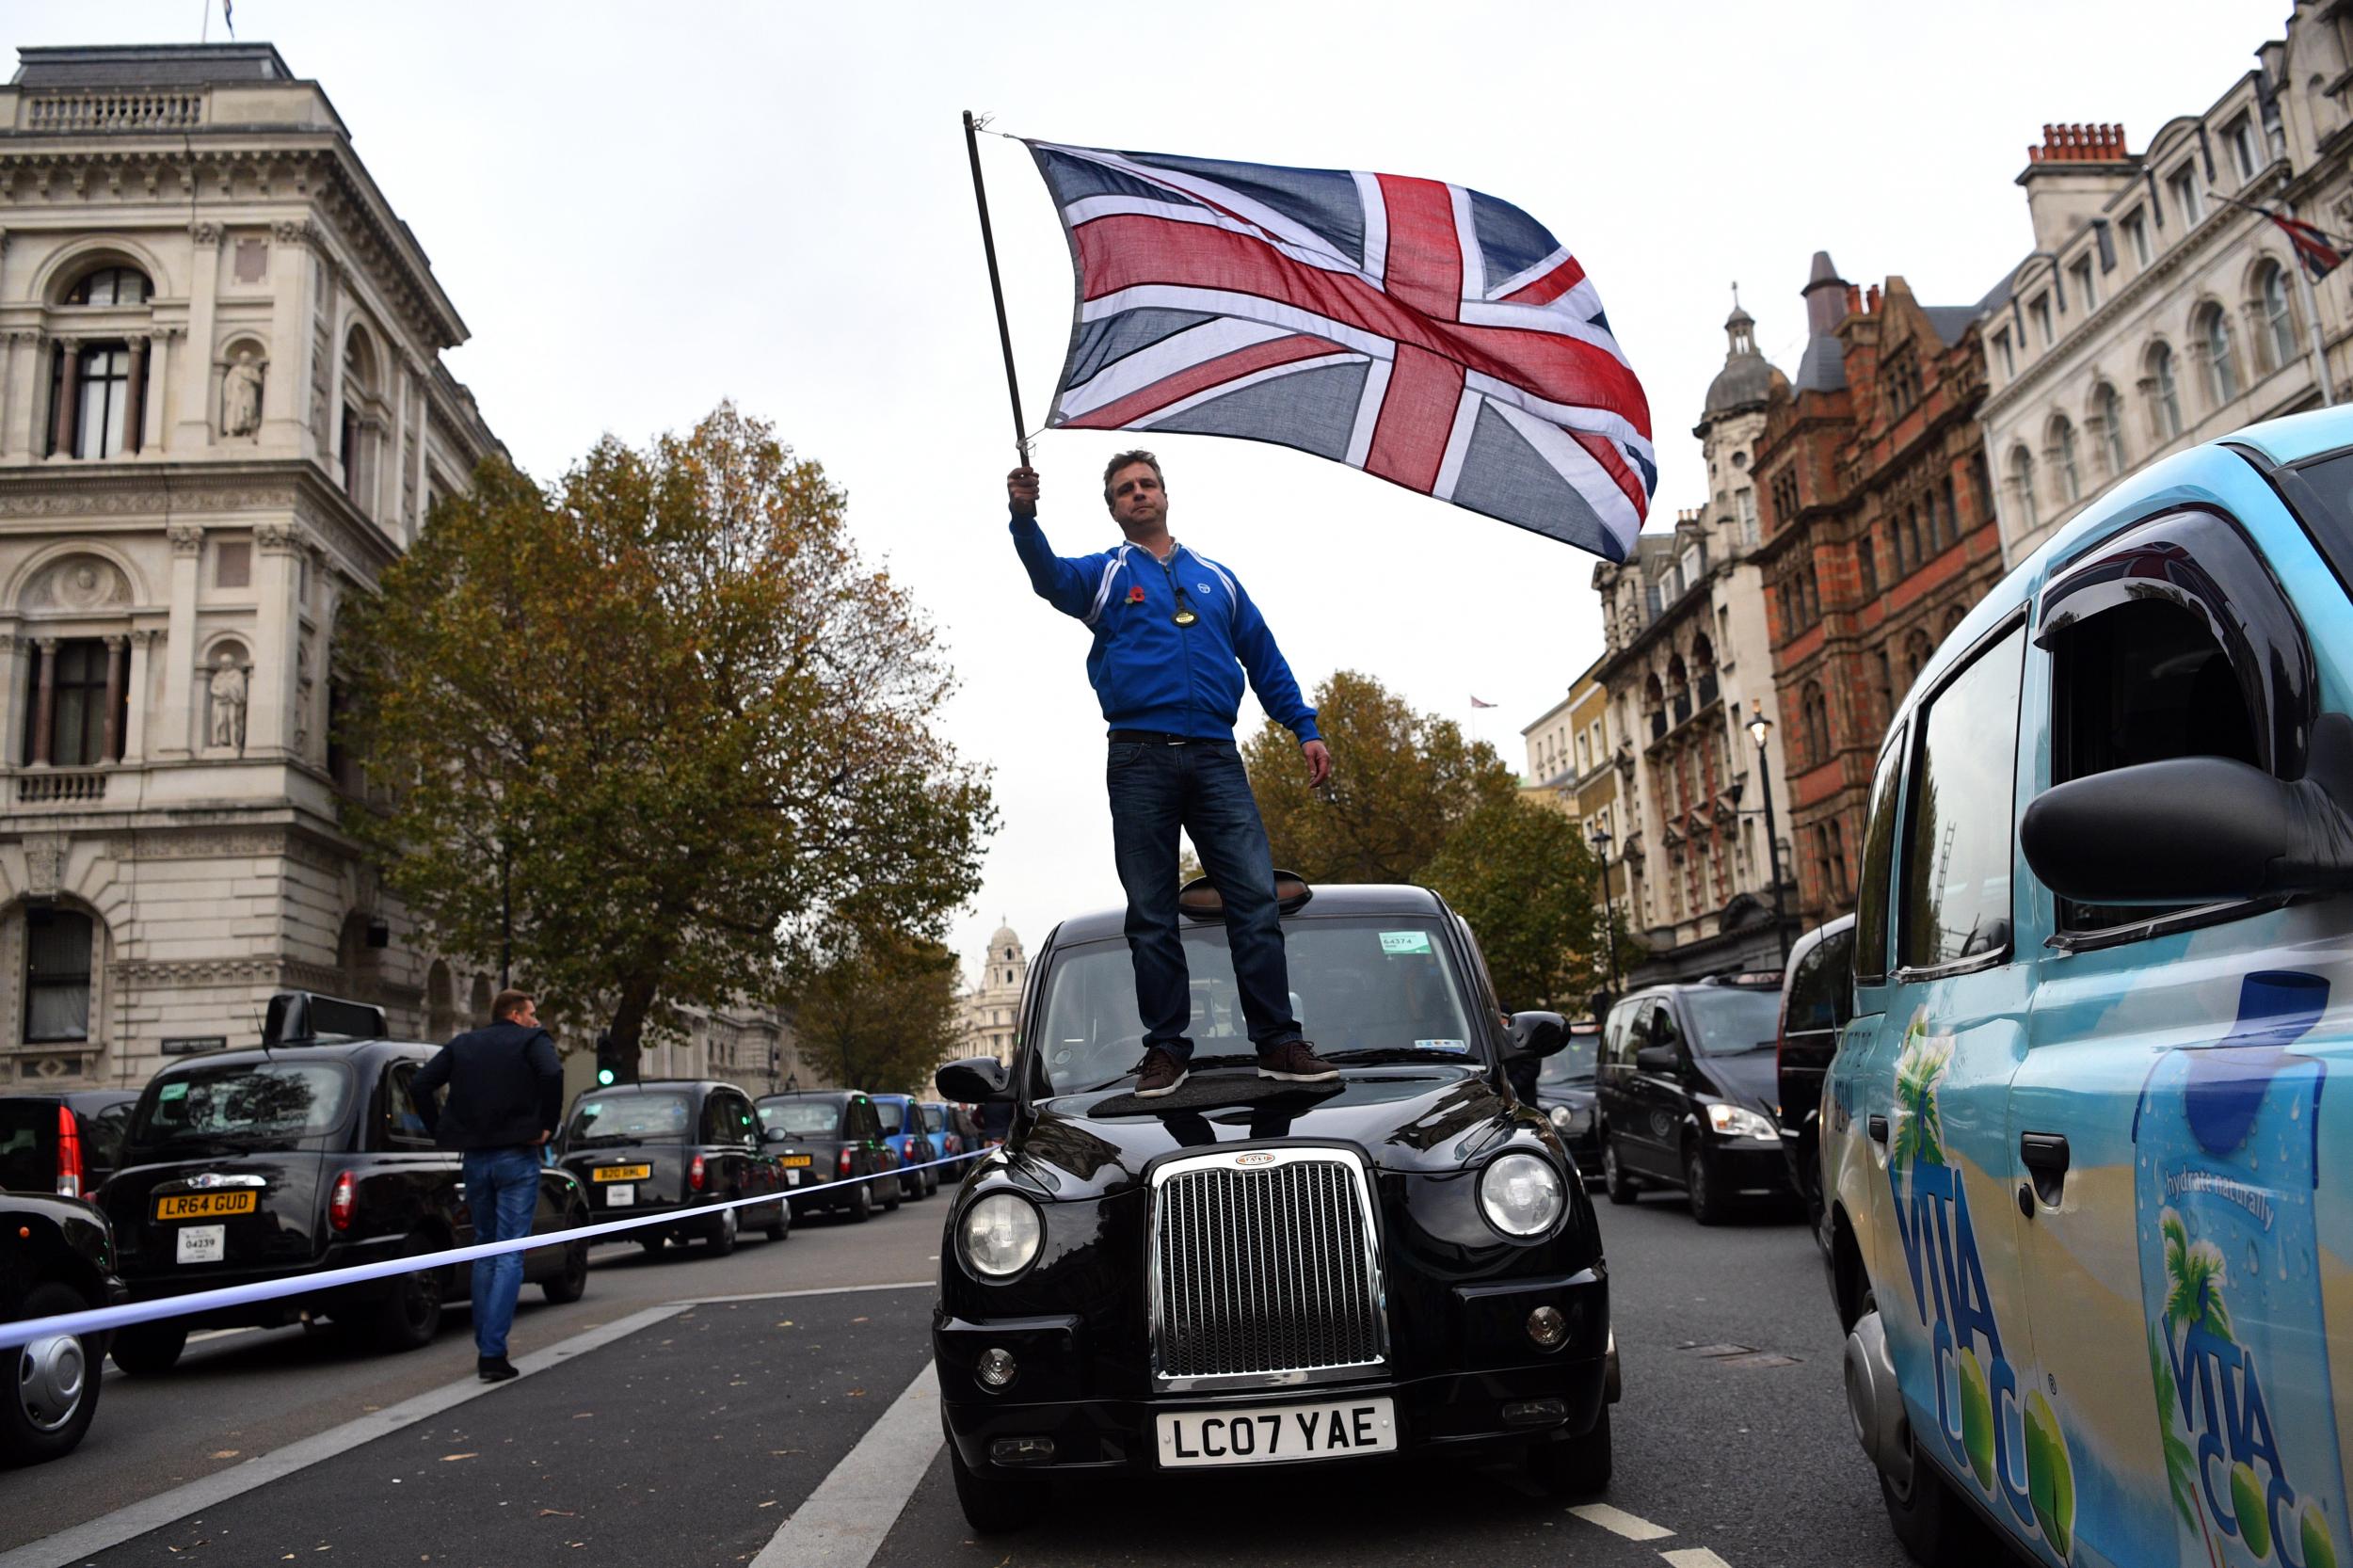 The most diverse occupation in the UK is taxi and minicab driving